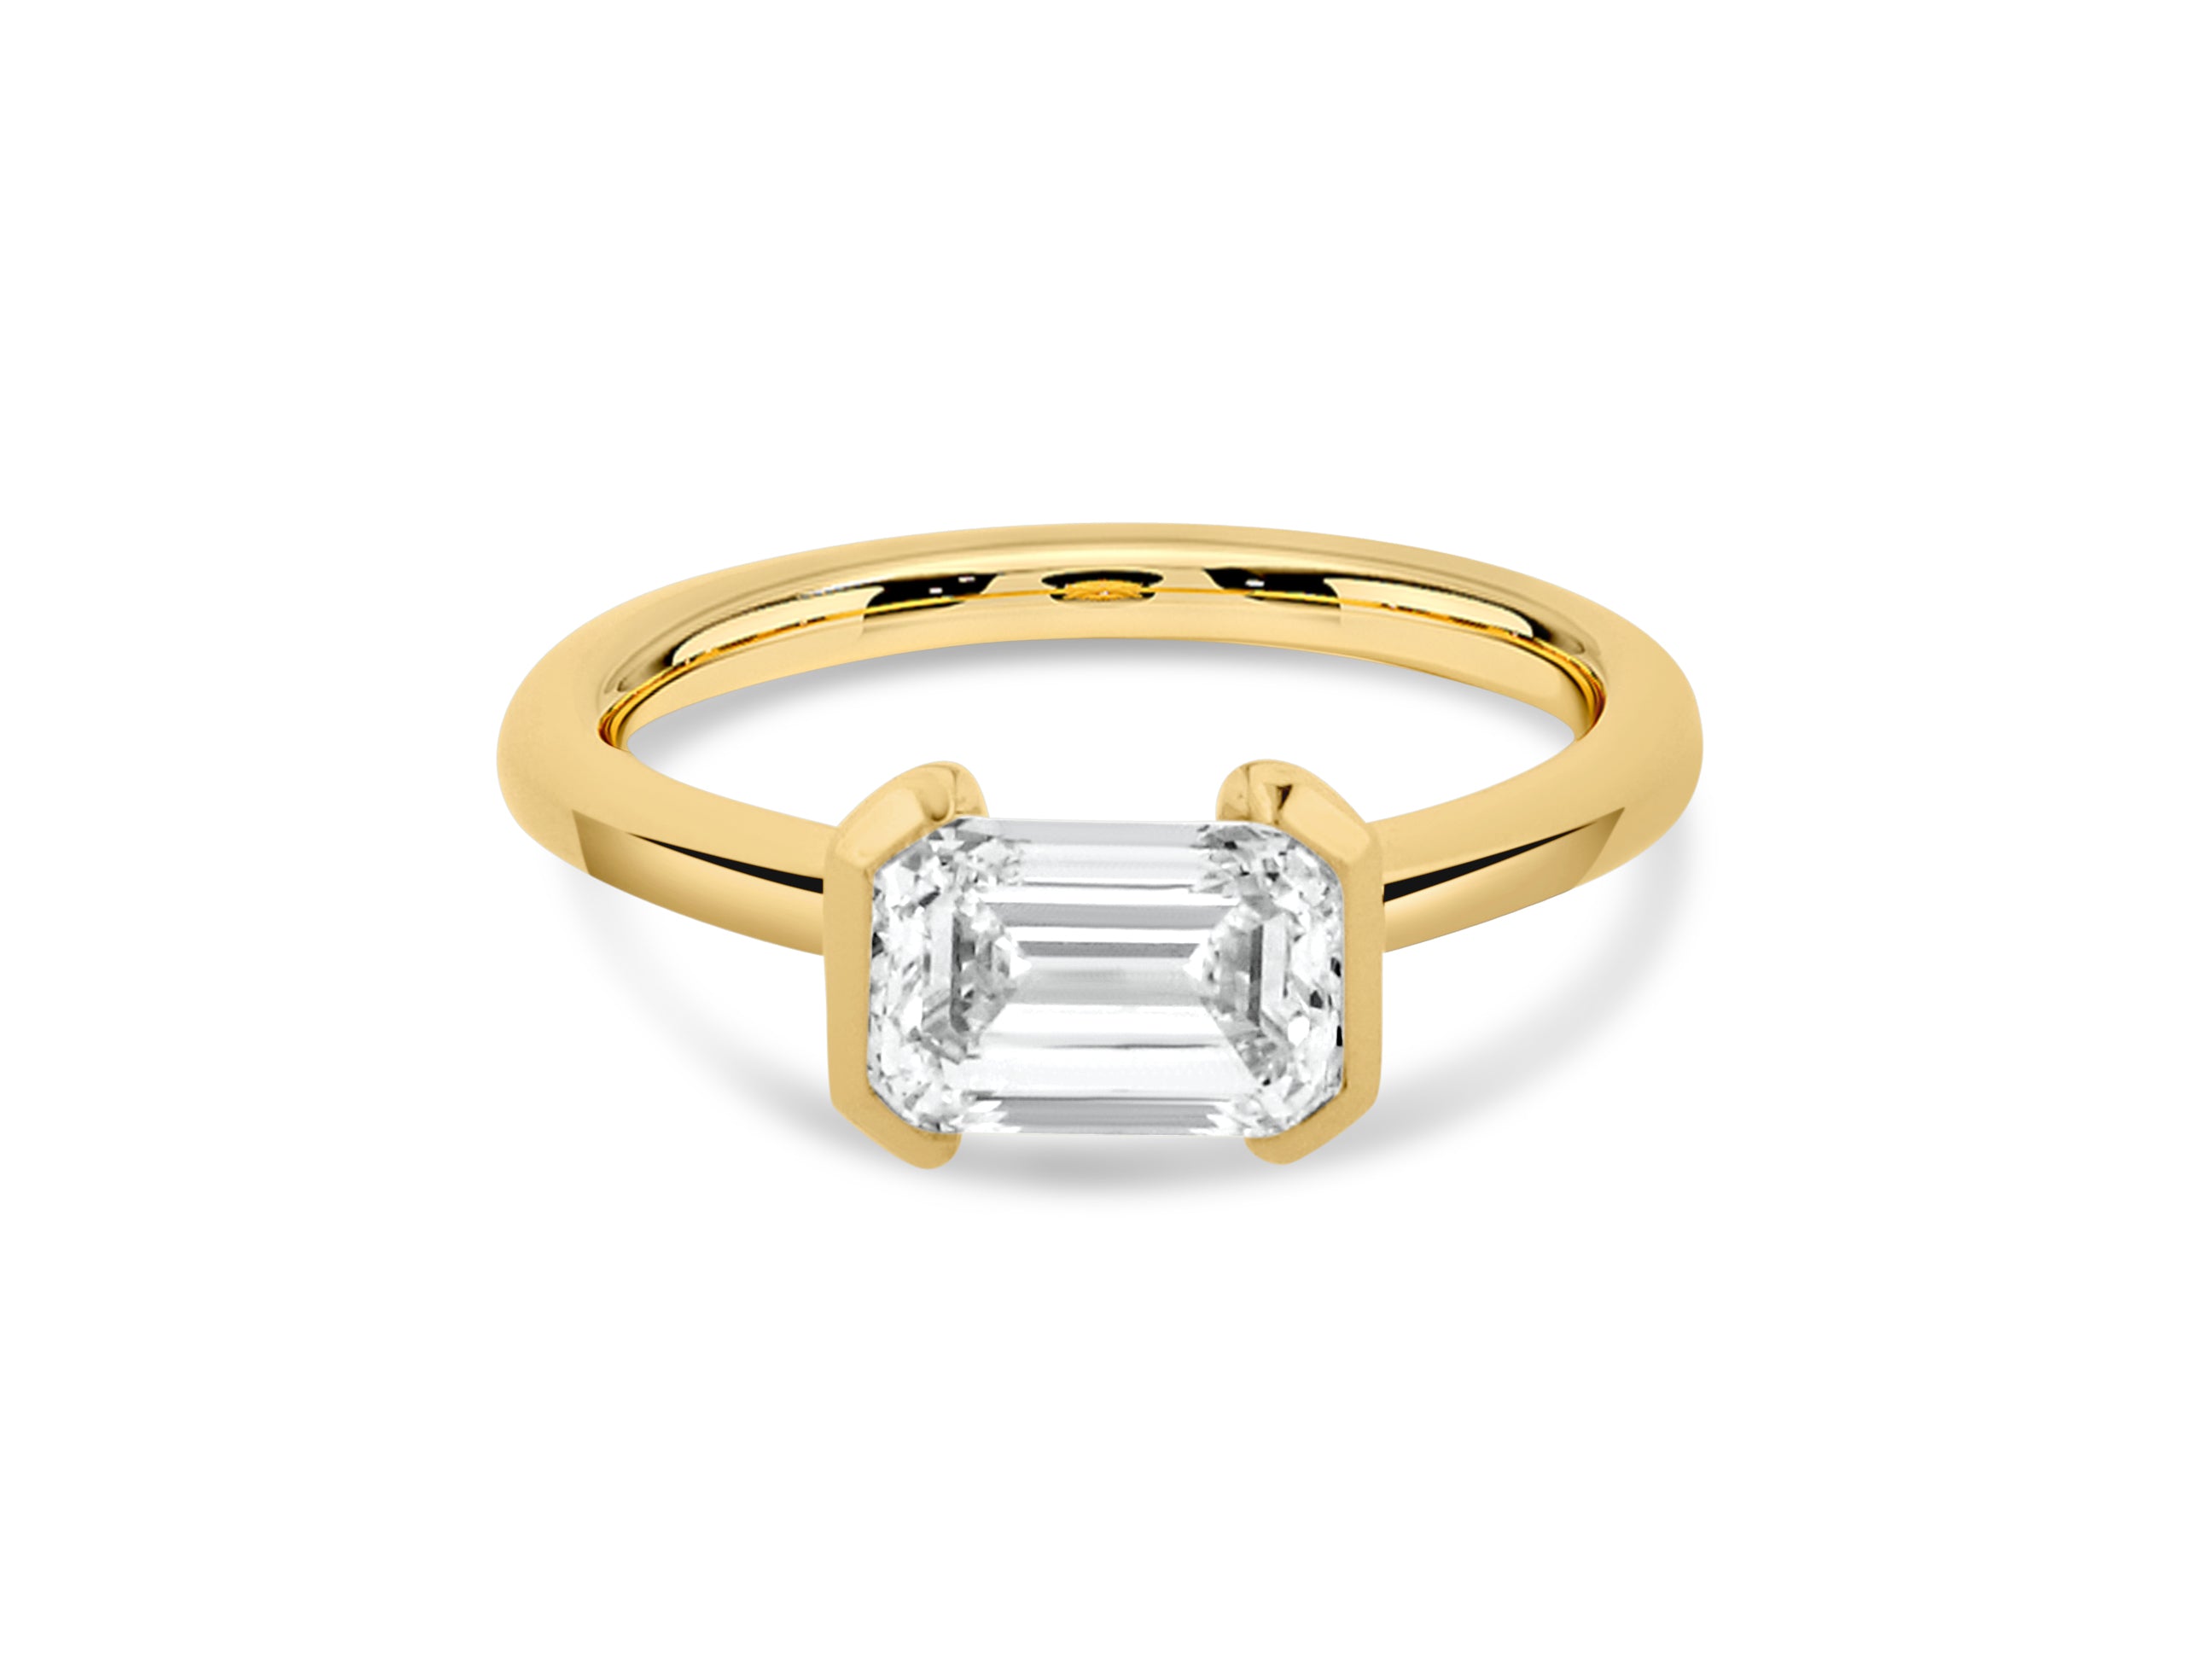 PRIVE' 1.56CT SI1 CLARITY AND E COLOR EMERALD CUT SWAROVSKI LAB GROWN DIAMOND.  CERTIFIED AND EXCELLENT CUT